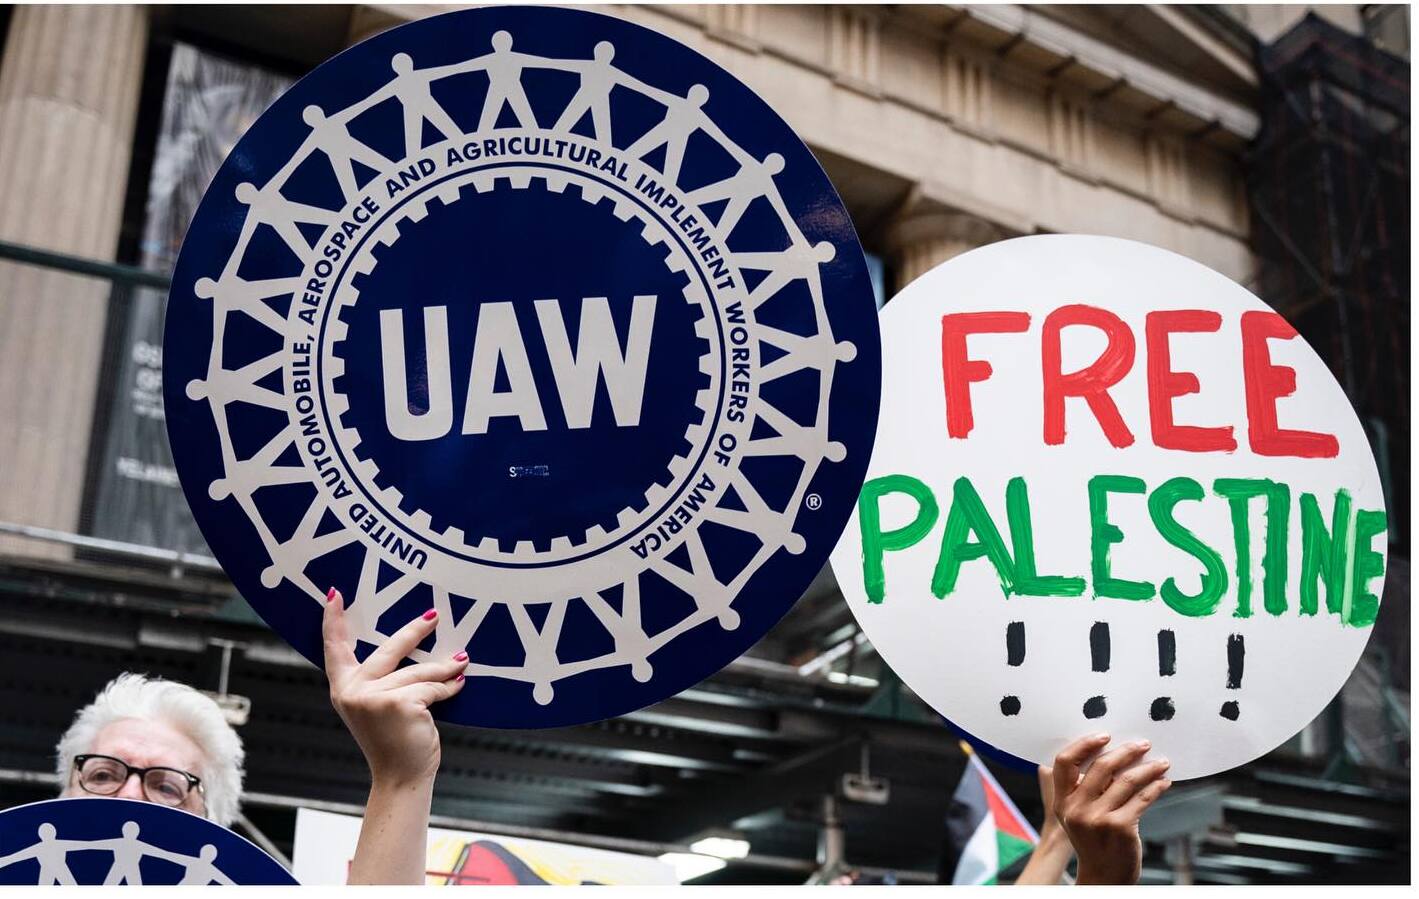 A UAW sign is held next to a "Free Palestine" sign